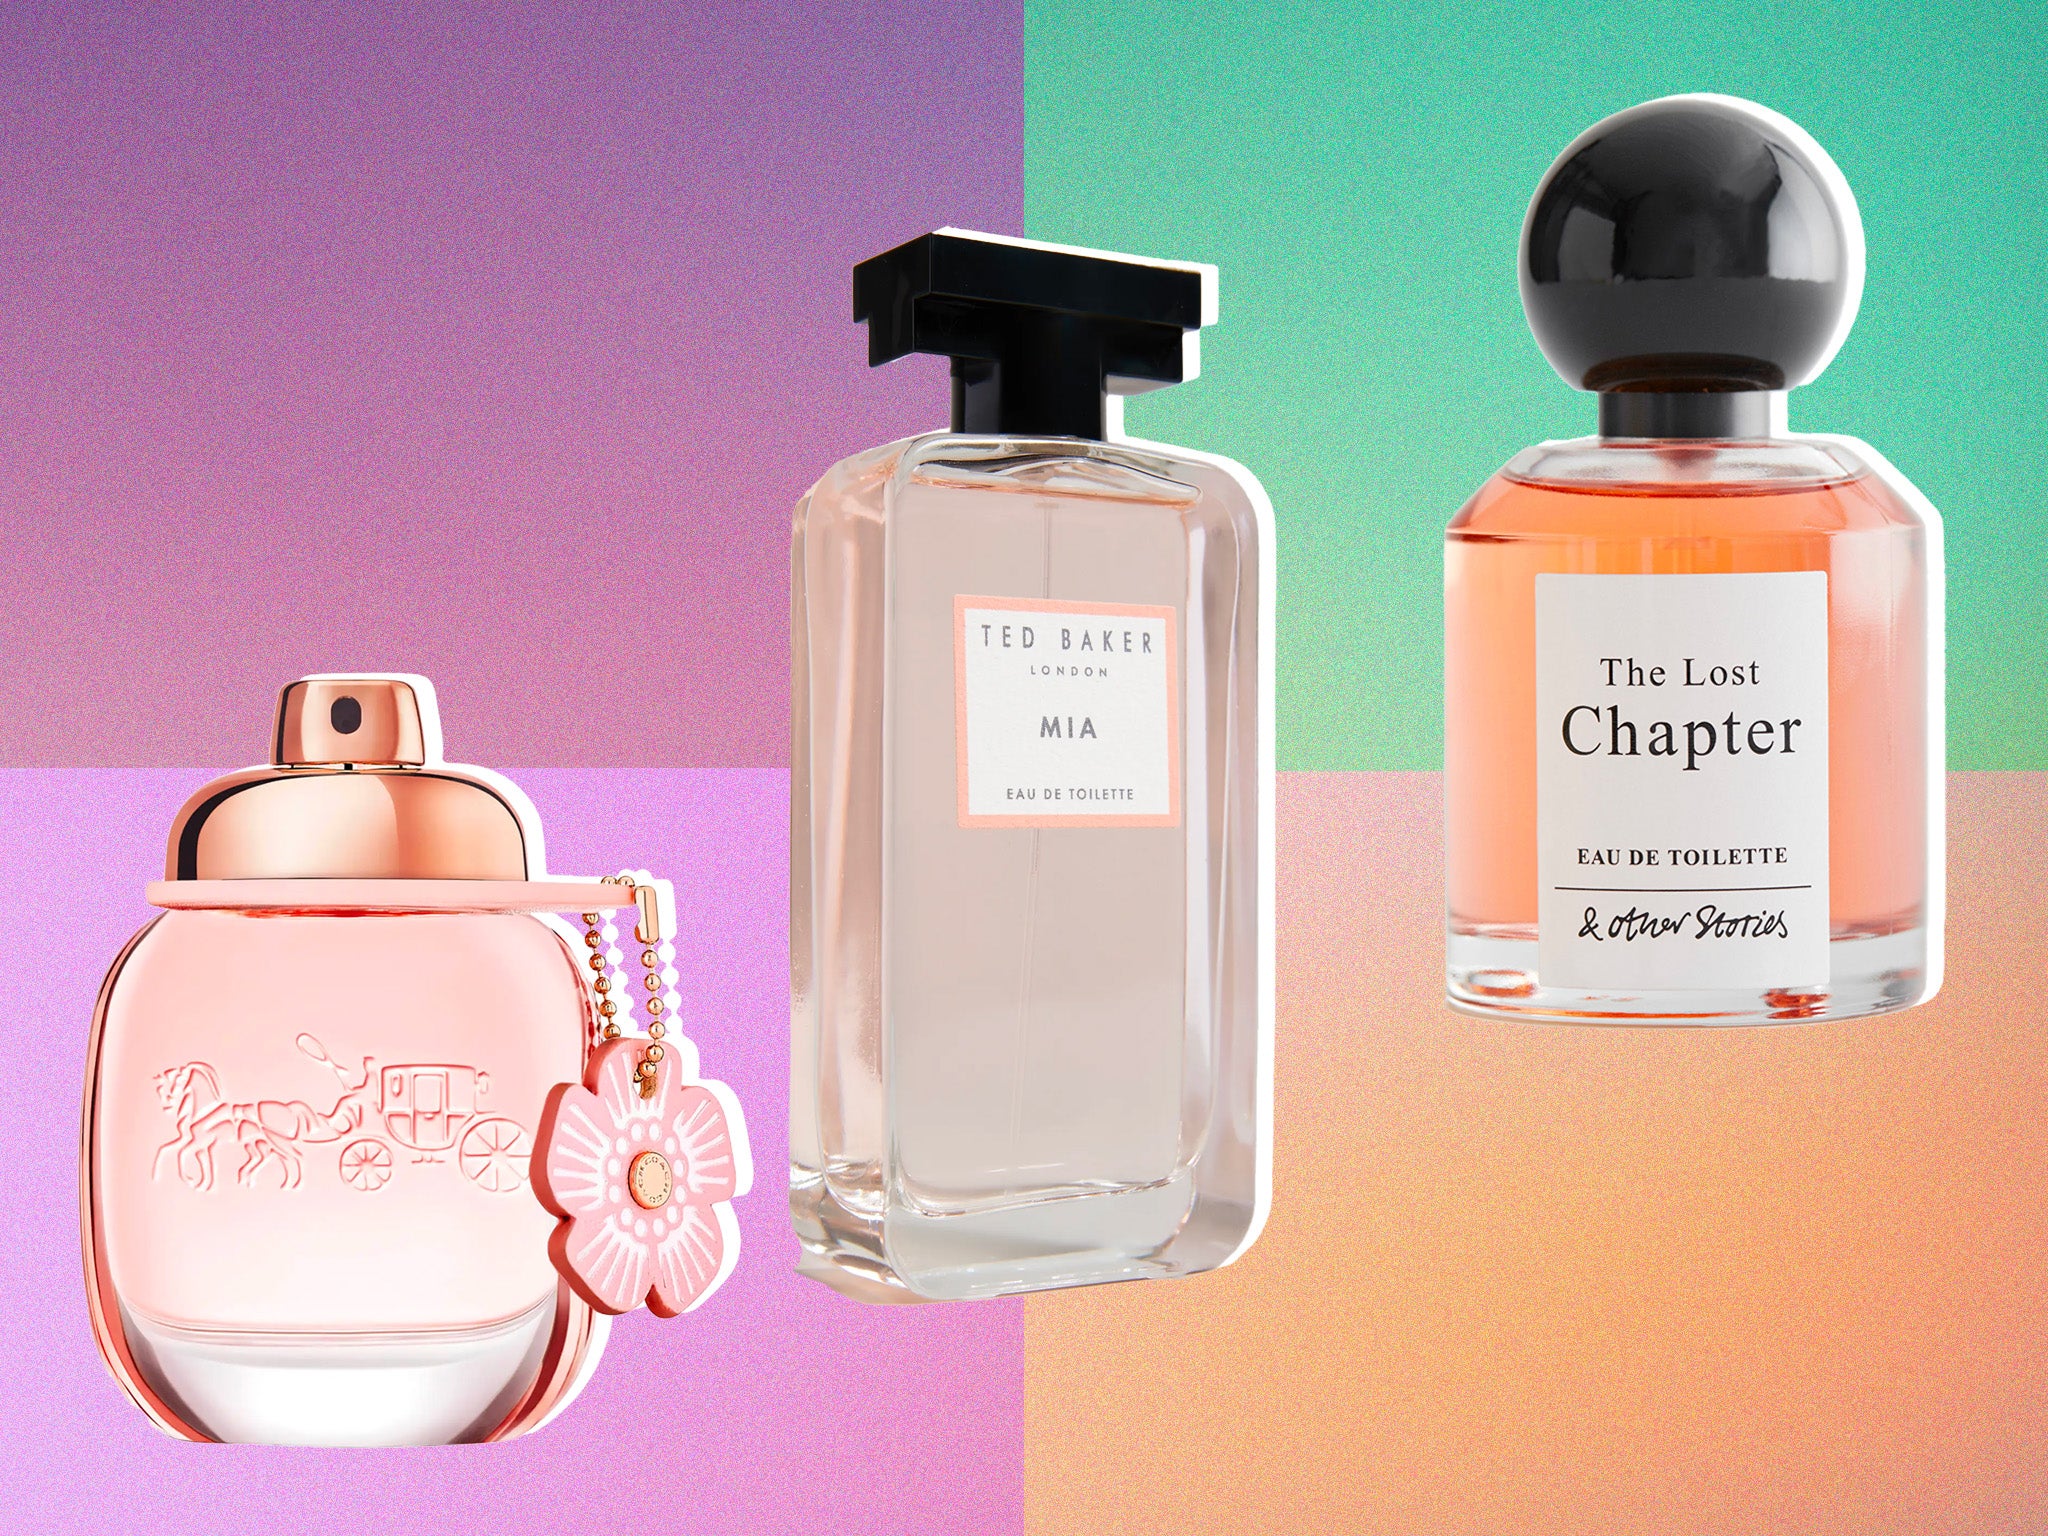 The 16 Best Perfume Gift Sets of 2023 - Top Fragrance Gifts